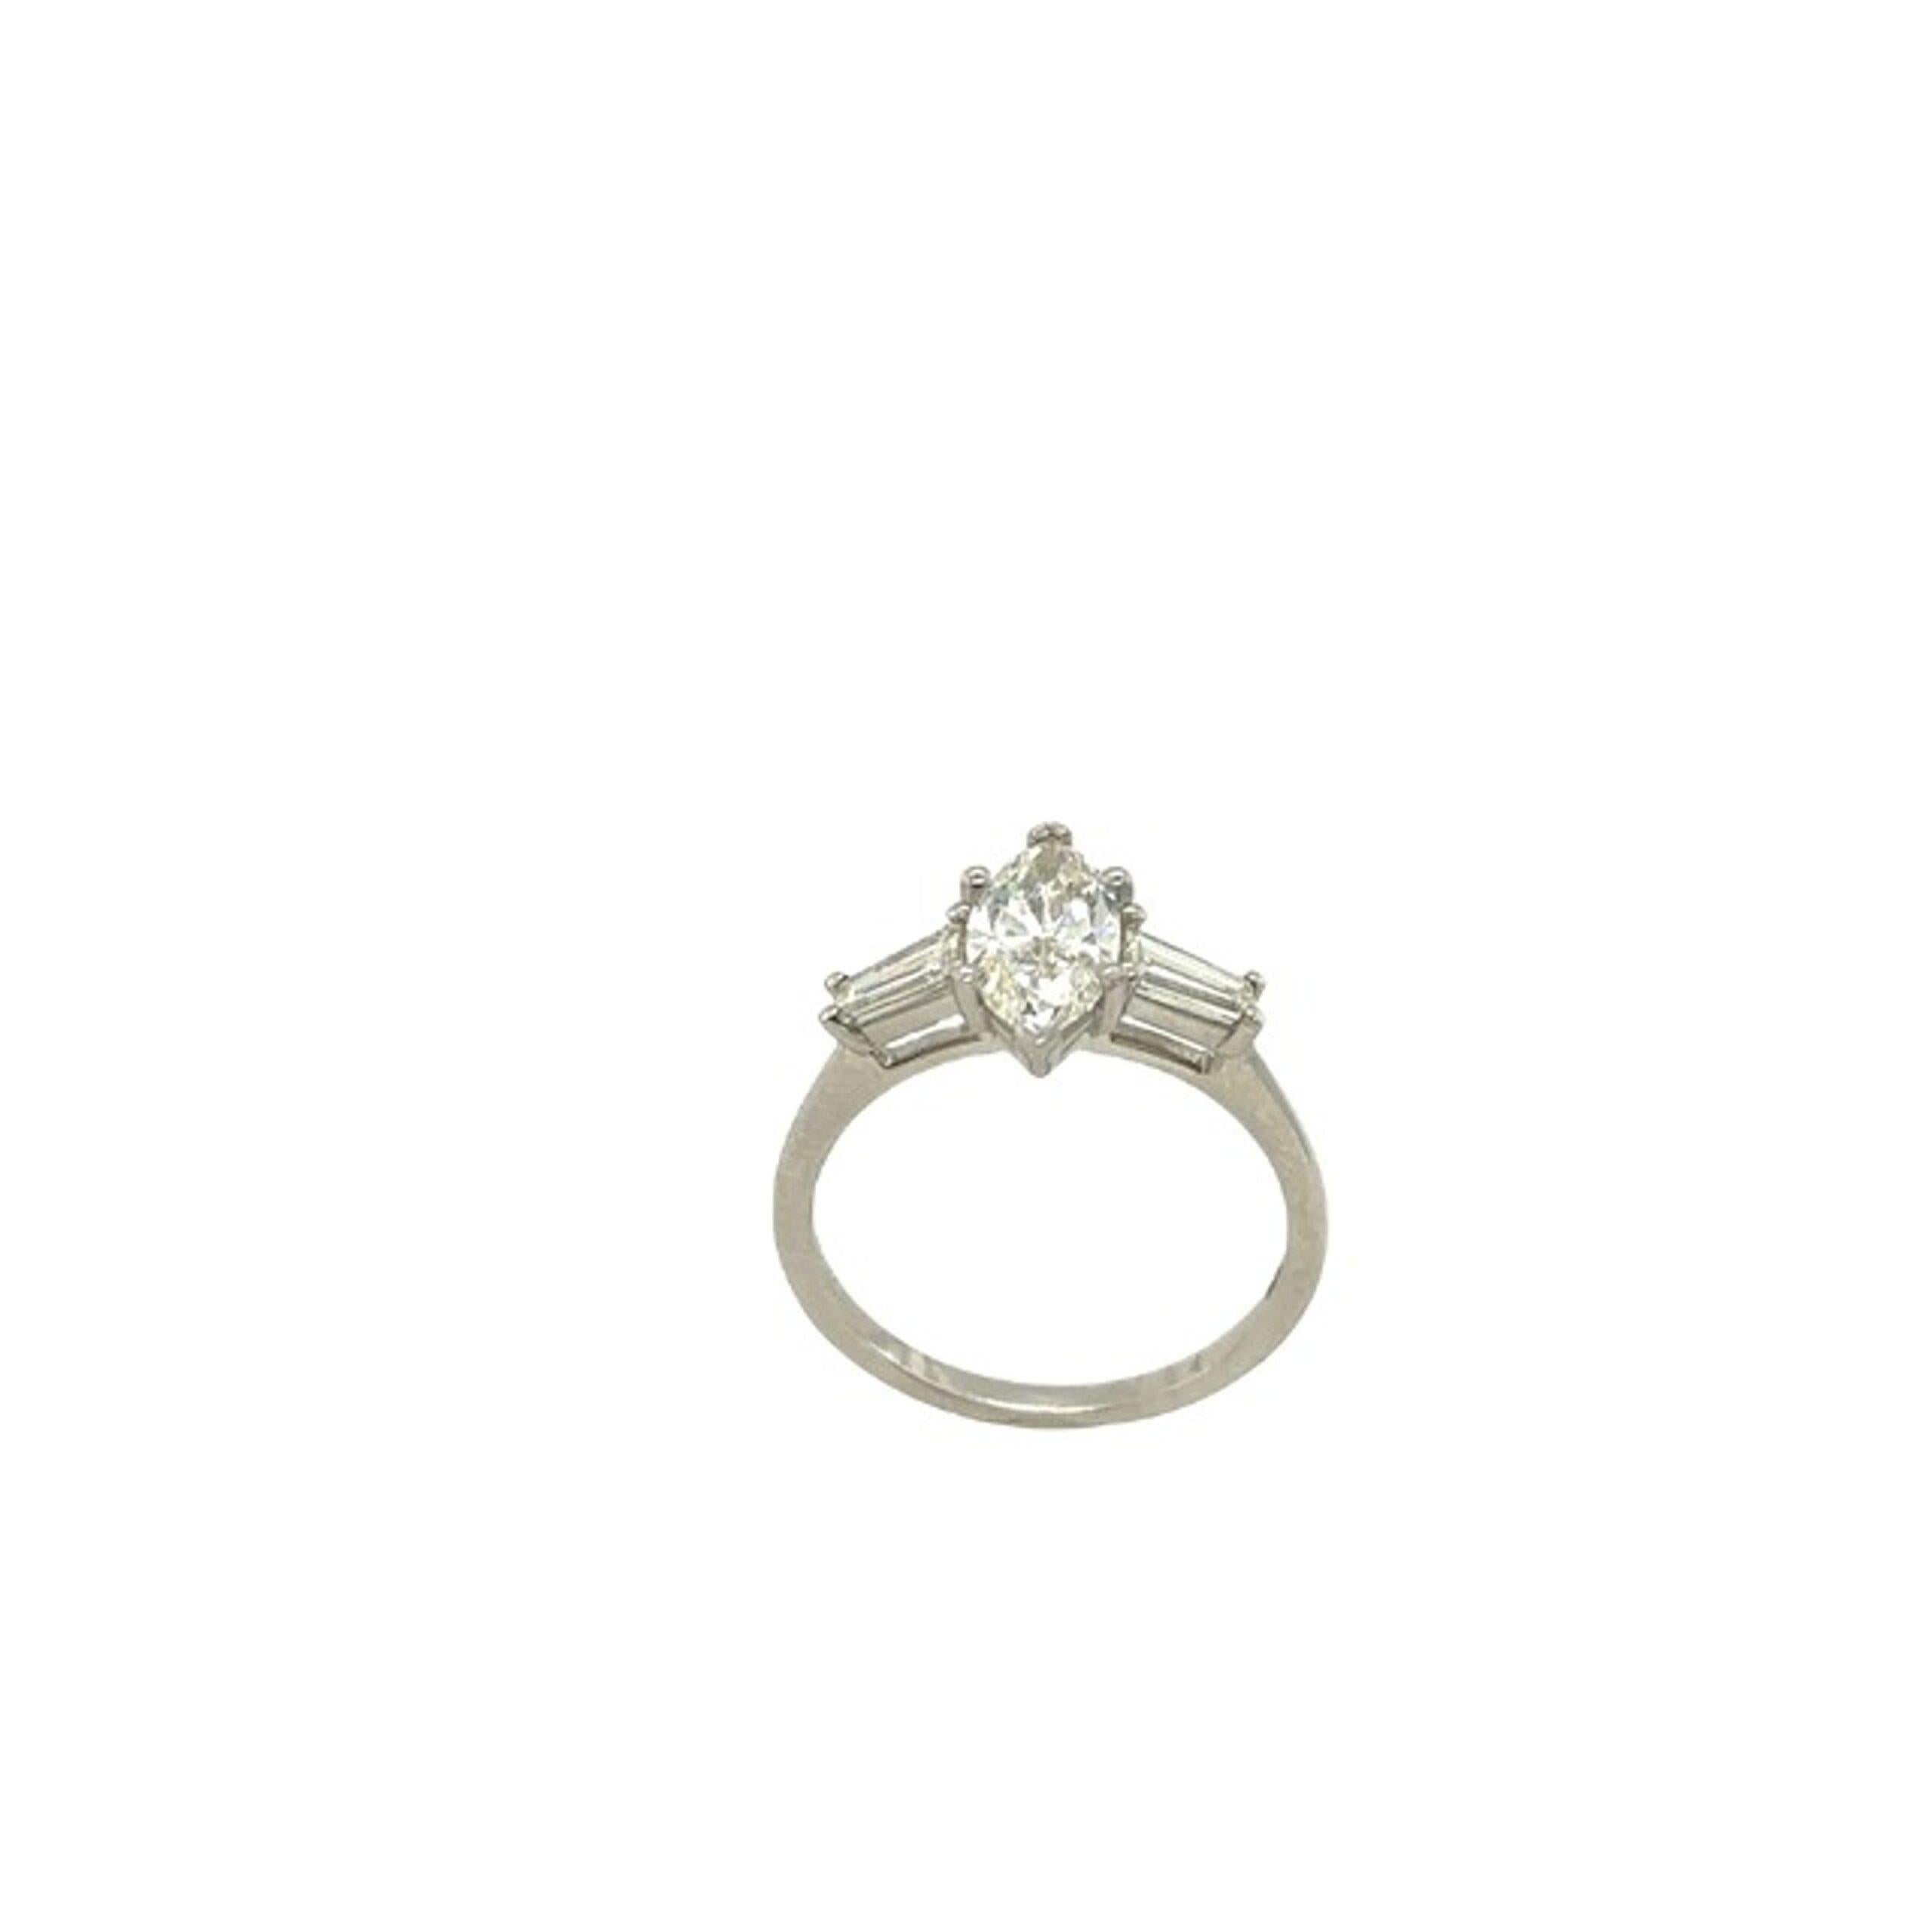 GIA Certified1.13ct Marquise Diamond Set With 2 Matching Tapered Diamonds 0.48ct

Additional Information:
Total Diamond Weight : 1.13ct+0.48ct
Diamond Colour: K/G
Diamond Clarity: I1VS
Total  Weight: 4.0g
Ring Size: M1/2
Width of the Band :